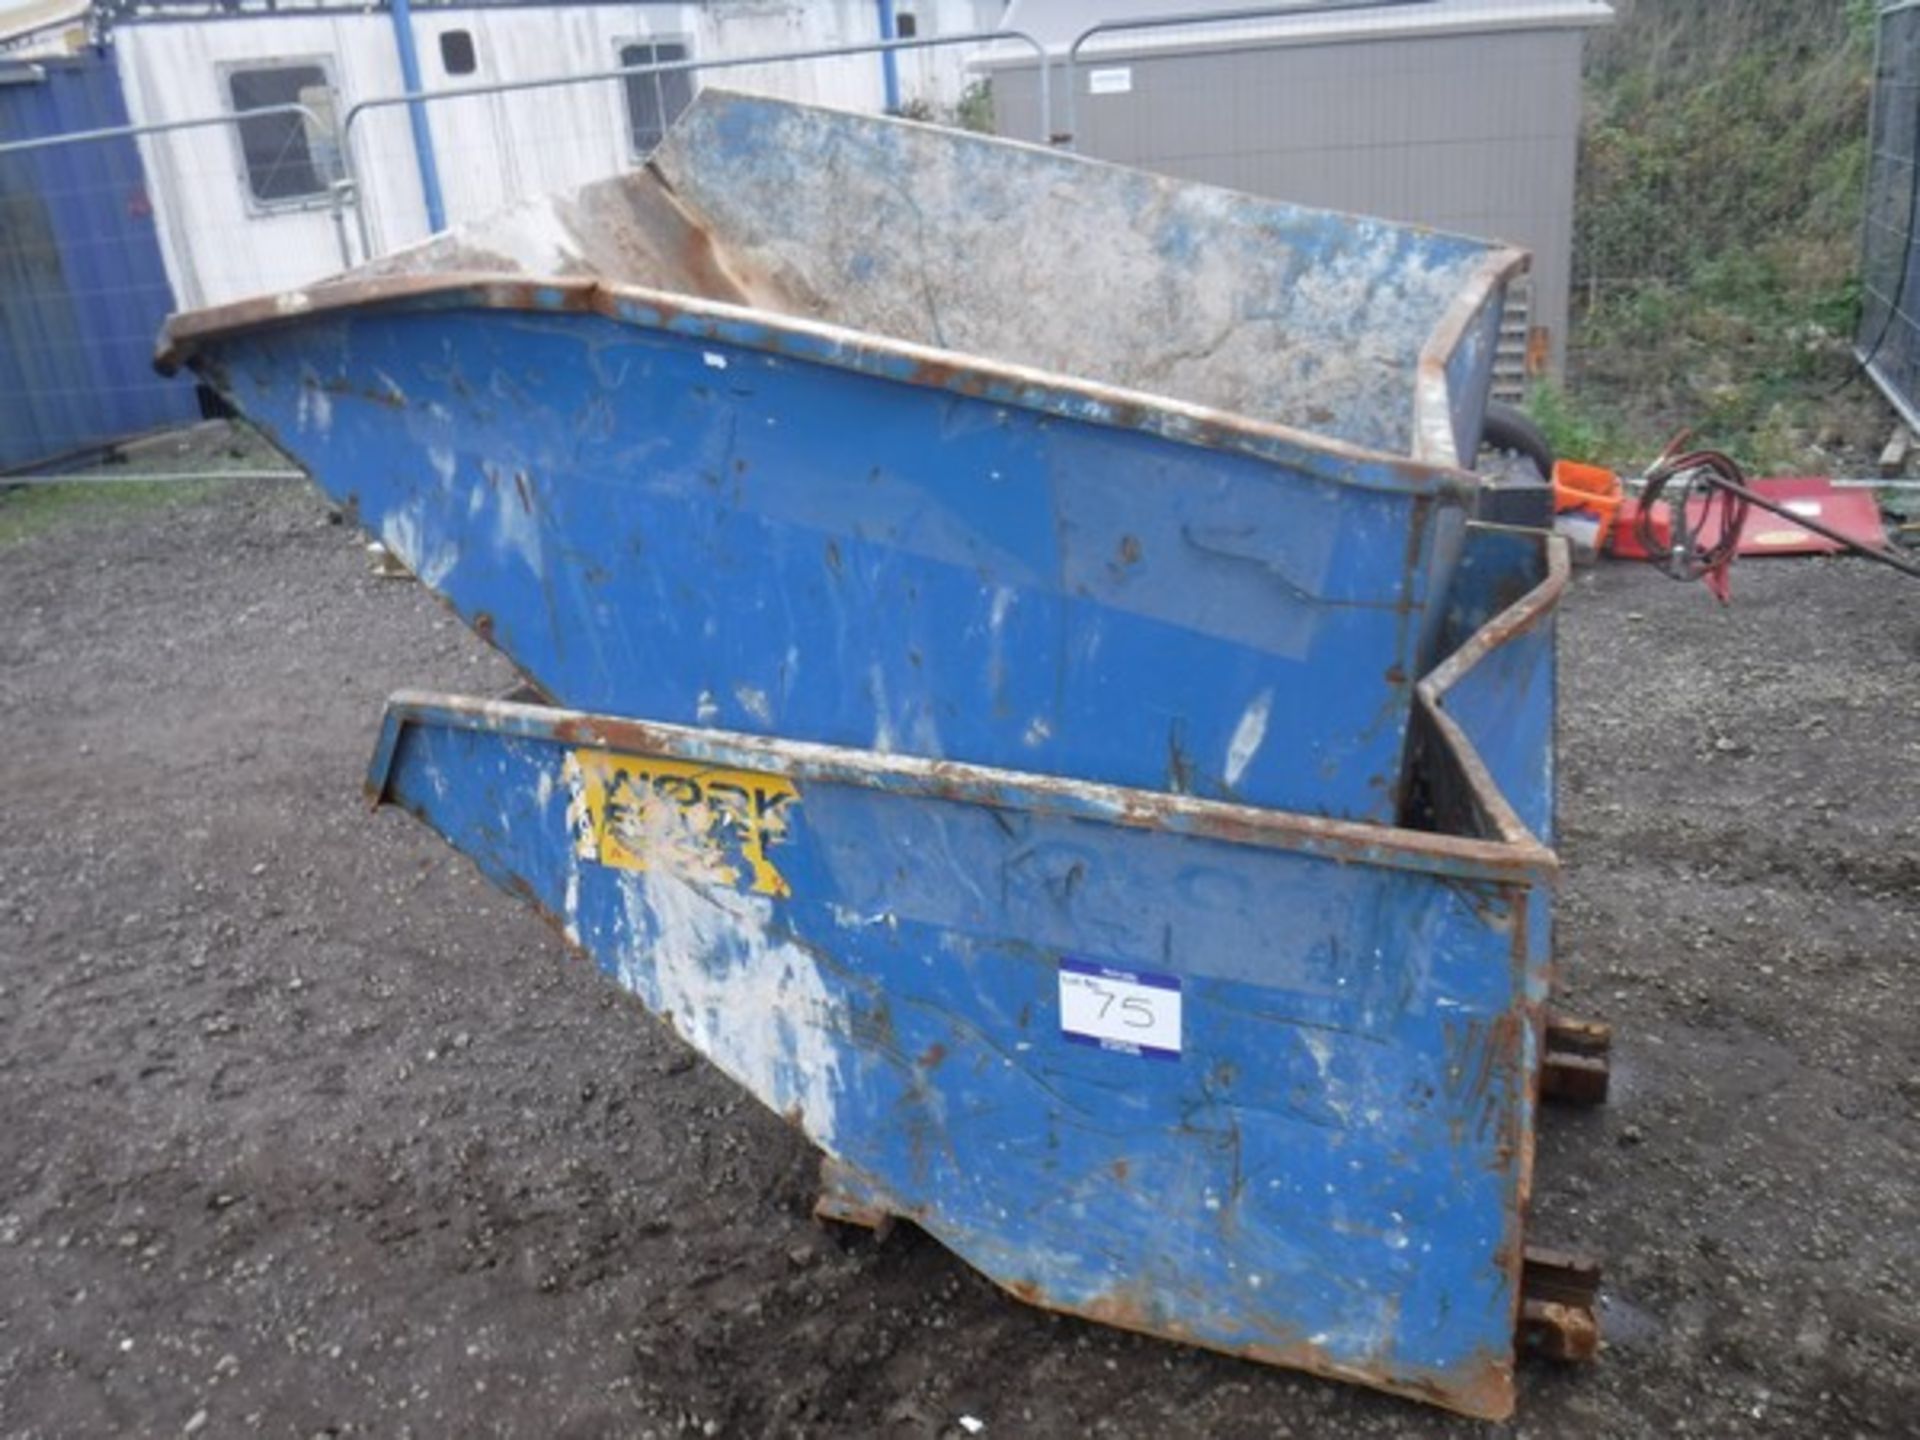 2015 CONQUIP 1200ltr tipping skips x 2 S/N CQ45589 & CQ47577 - Image 2 of 6